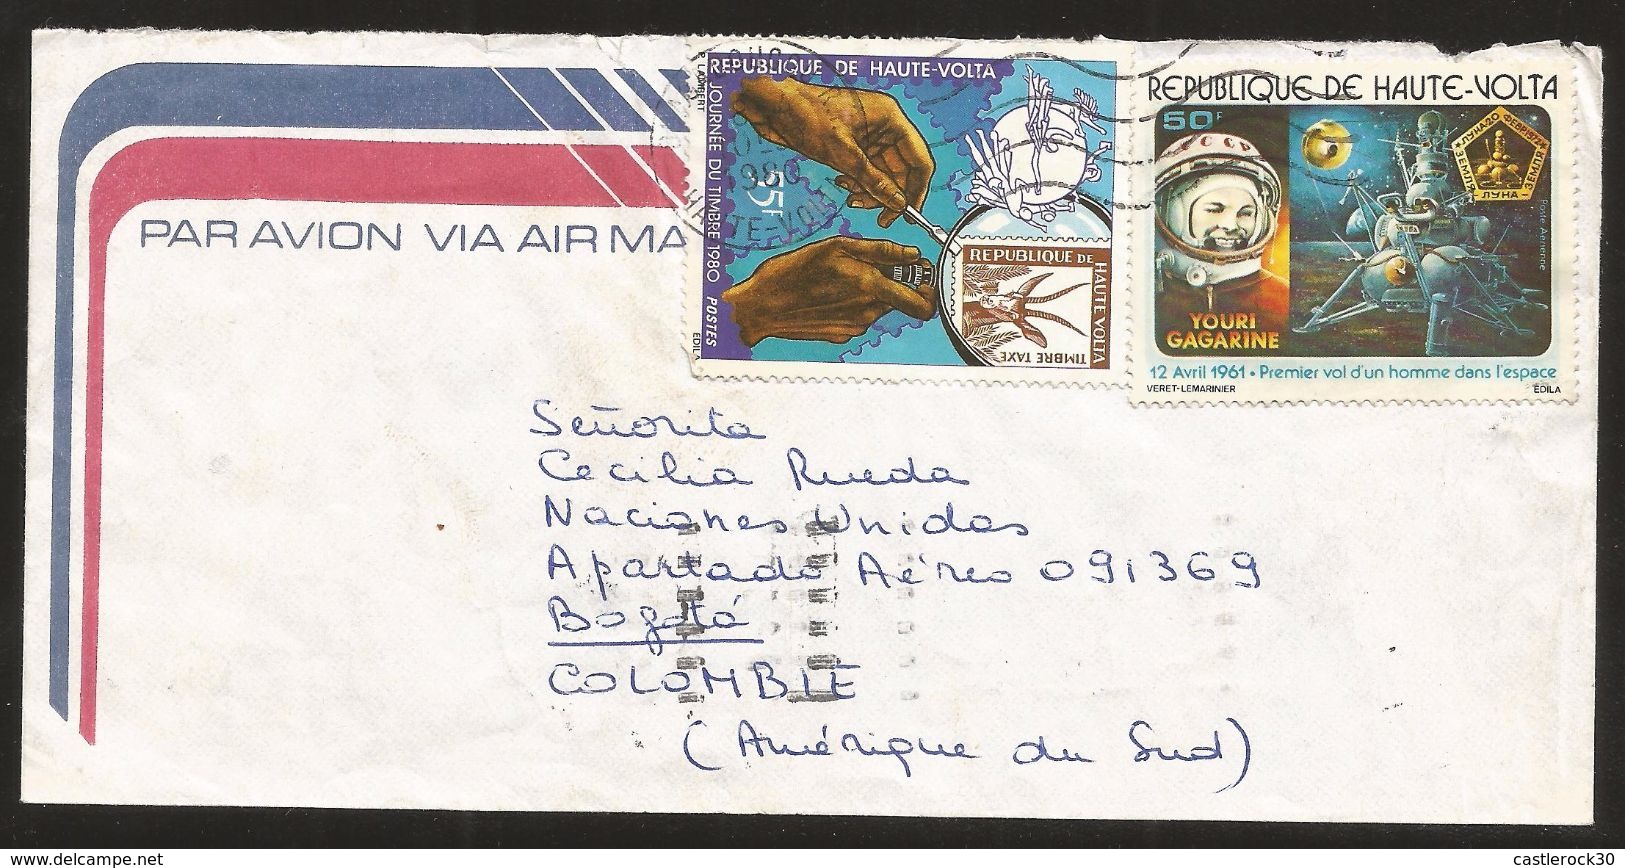 R) 1980 REPUBLICA HAUTE VOLTA, AIR MAIL TO BOGOTA COLOMBIA COMMEMORATIVE STAMPS OF THE FIRST FLIGHT TO SPACE - Europe (Other)